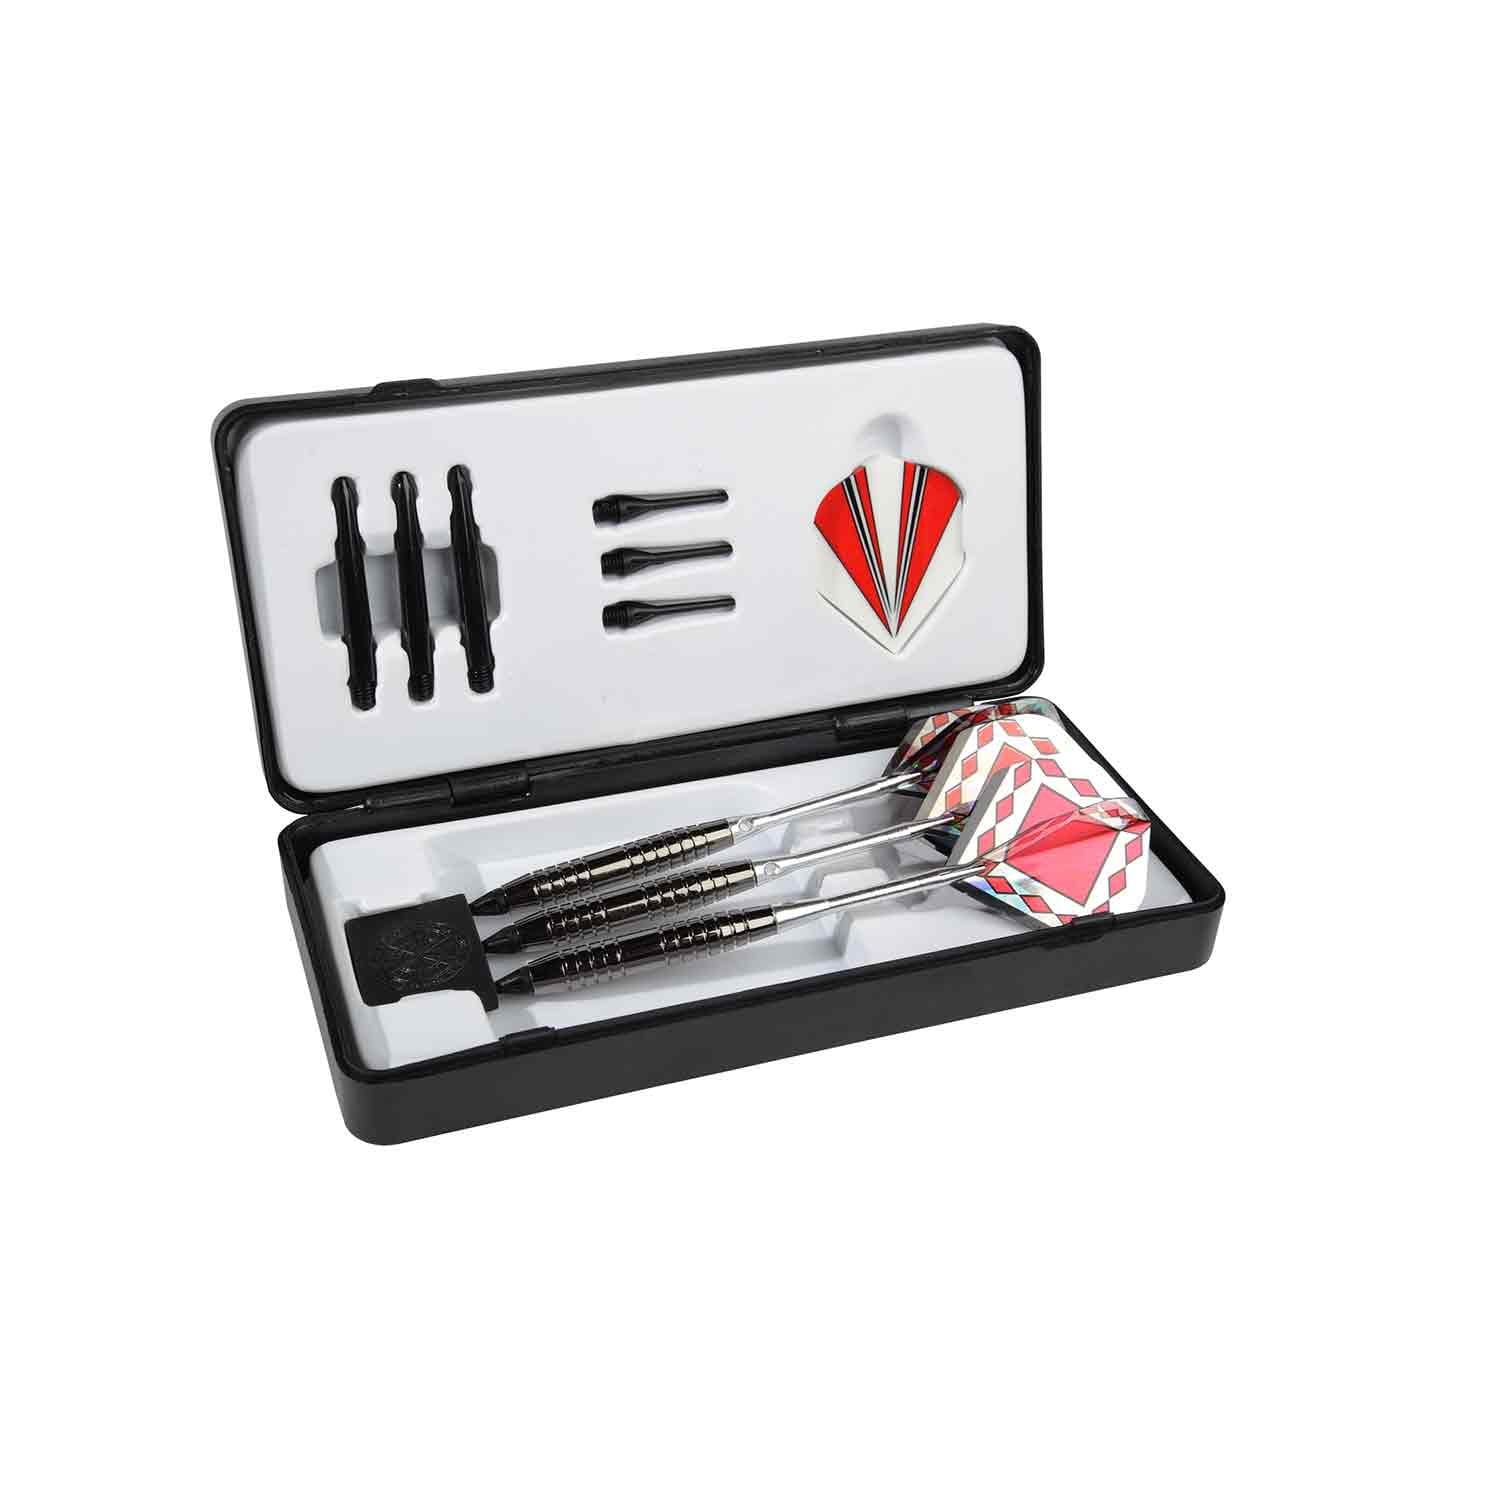 Tournament Pro Franklin RT500 18g Tungsten Plated Soft Tip Darts & Deluxe Case 